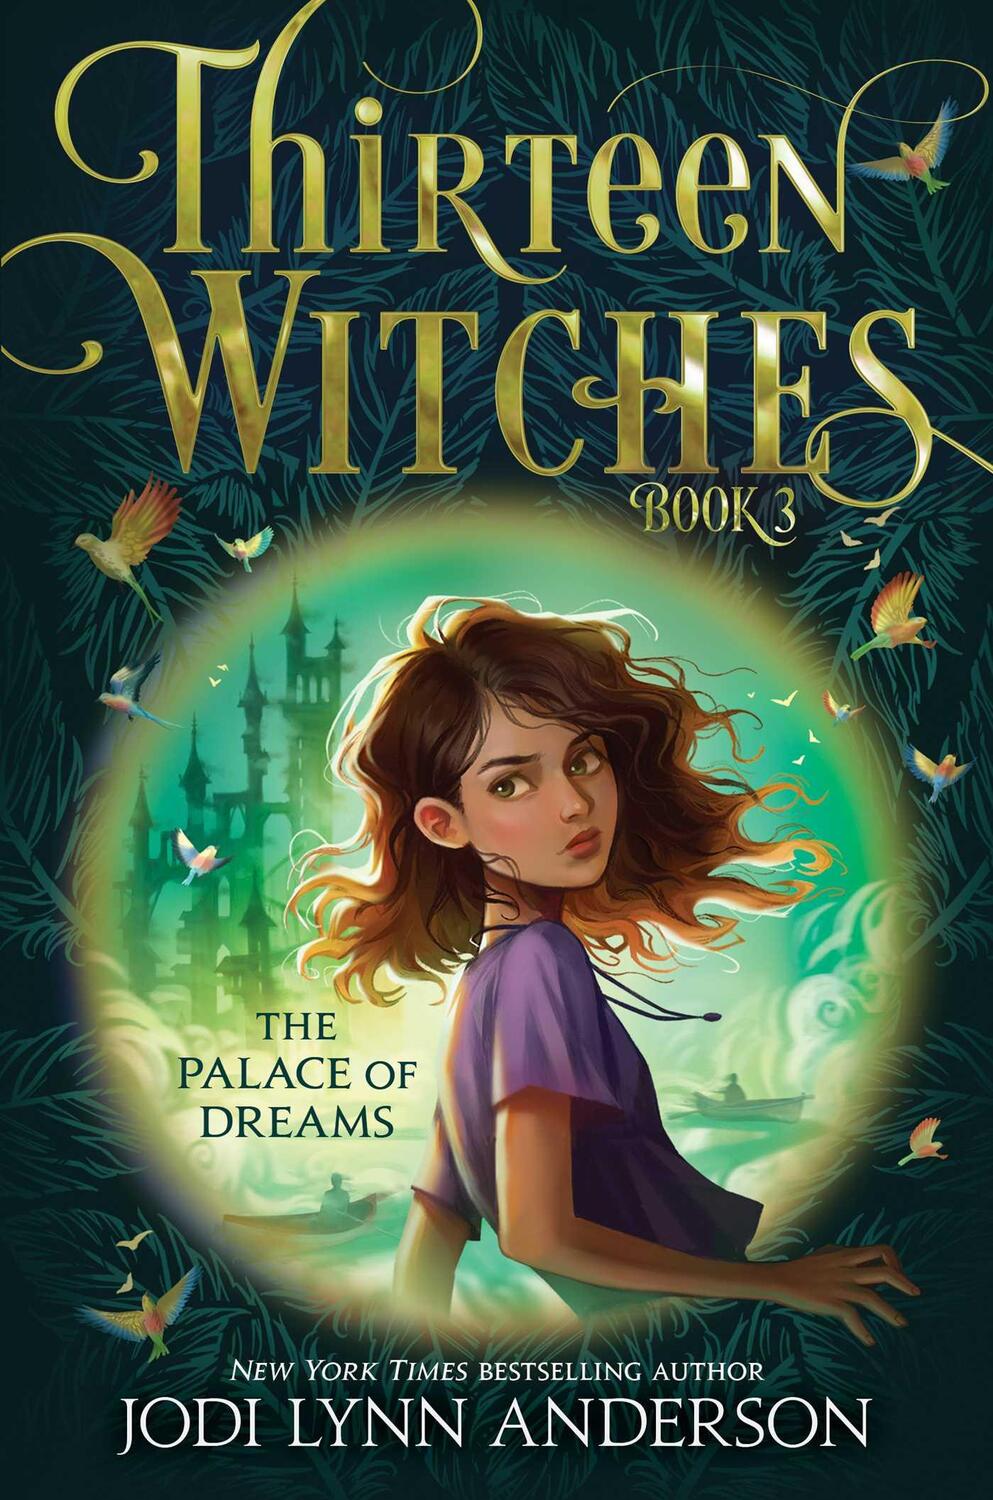 Bild: 9781534416499 | The Palace of Dreams | Jodi Lynn Anderson | Buch | Thirteen Witches